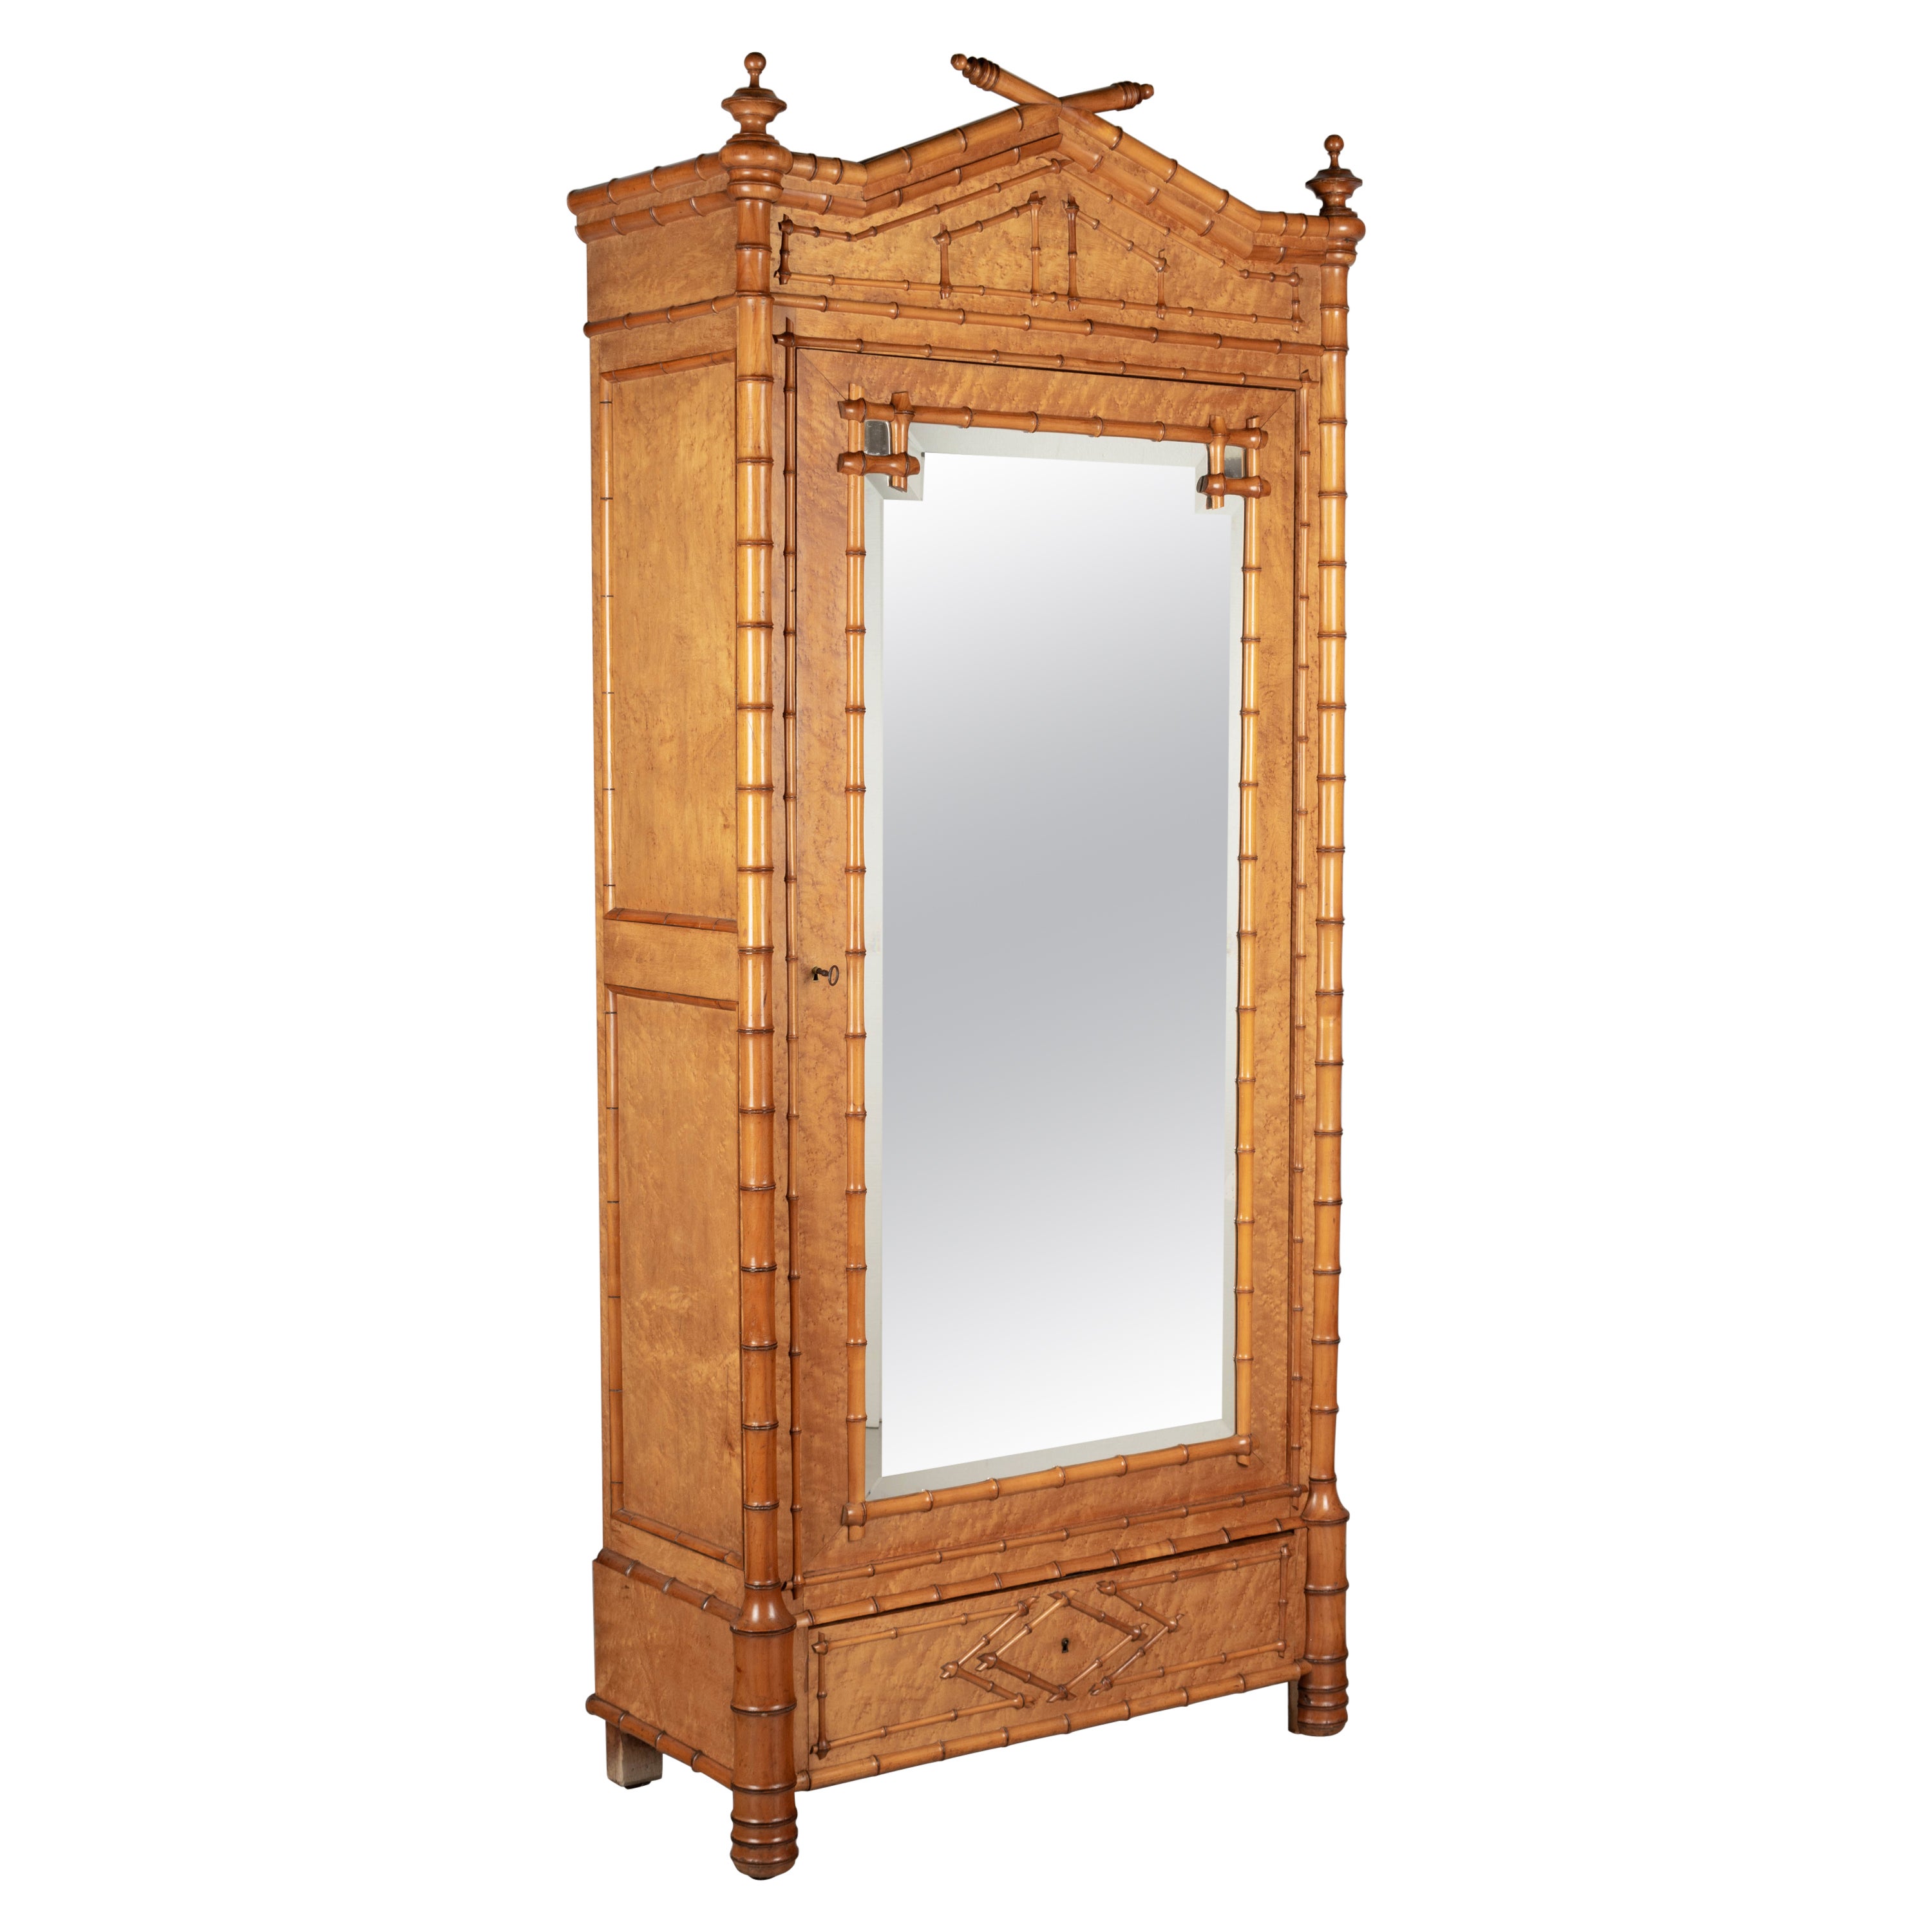 19th Century French Faux Bamboo Armoire or Wardrobe